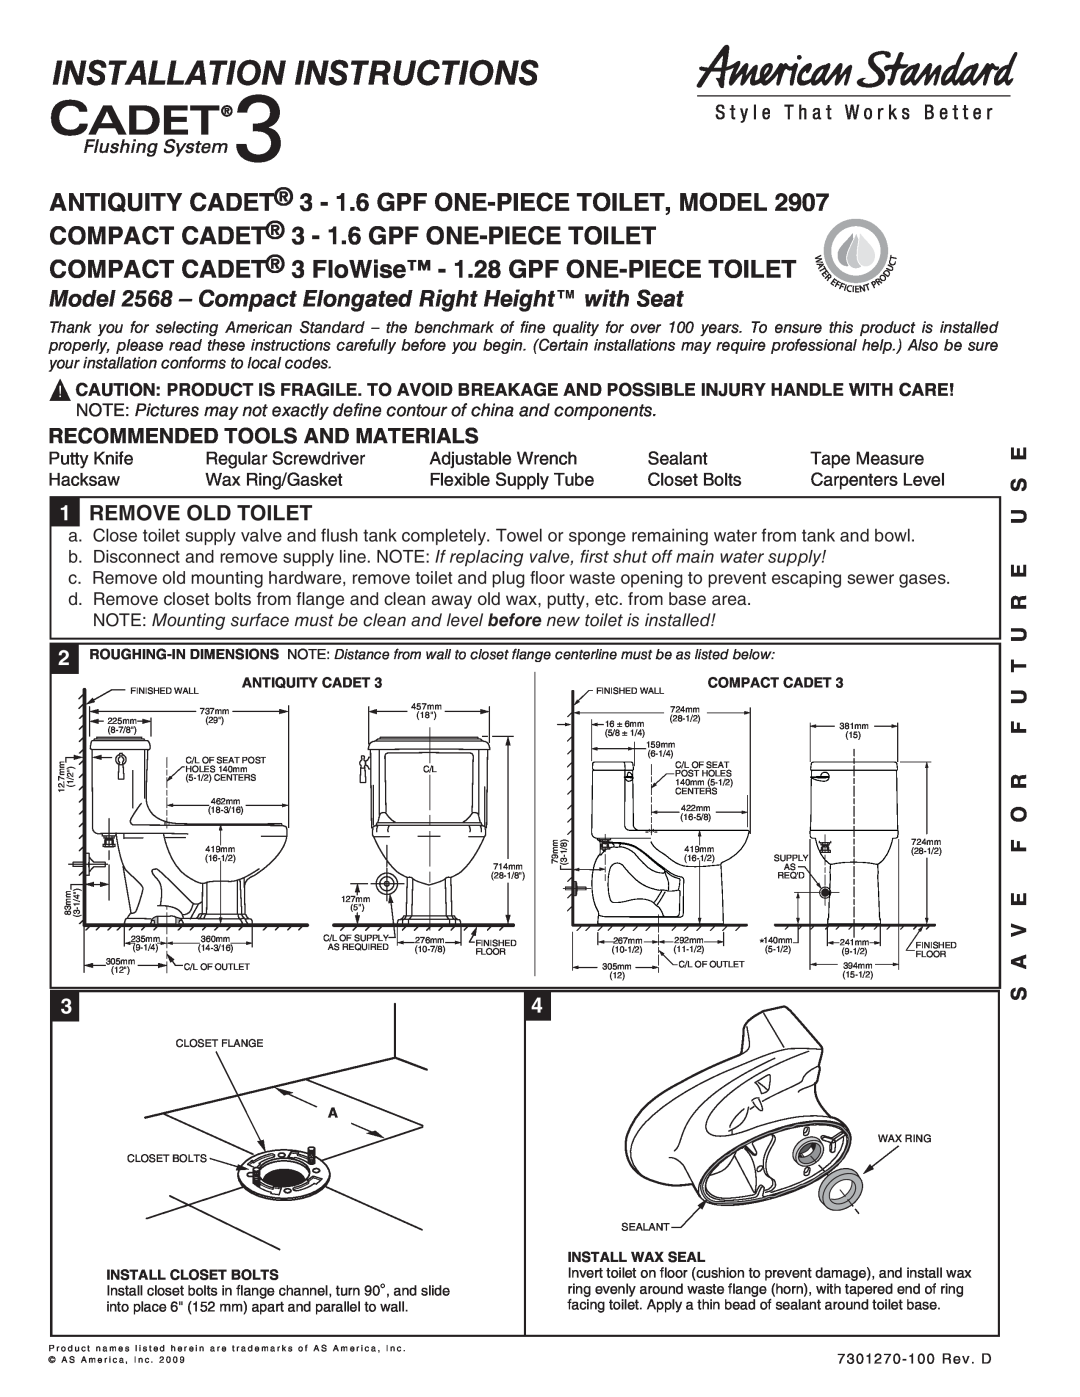 American Standard 2907, 2568 installation instructions Recommended Tools And Materials, 1REMOVE OLD TOILET, T U R E U S E 